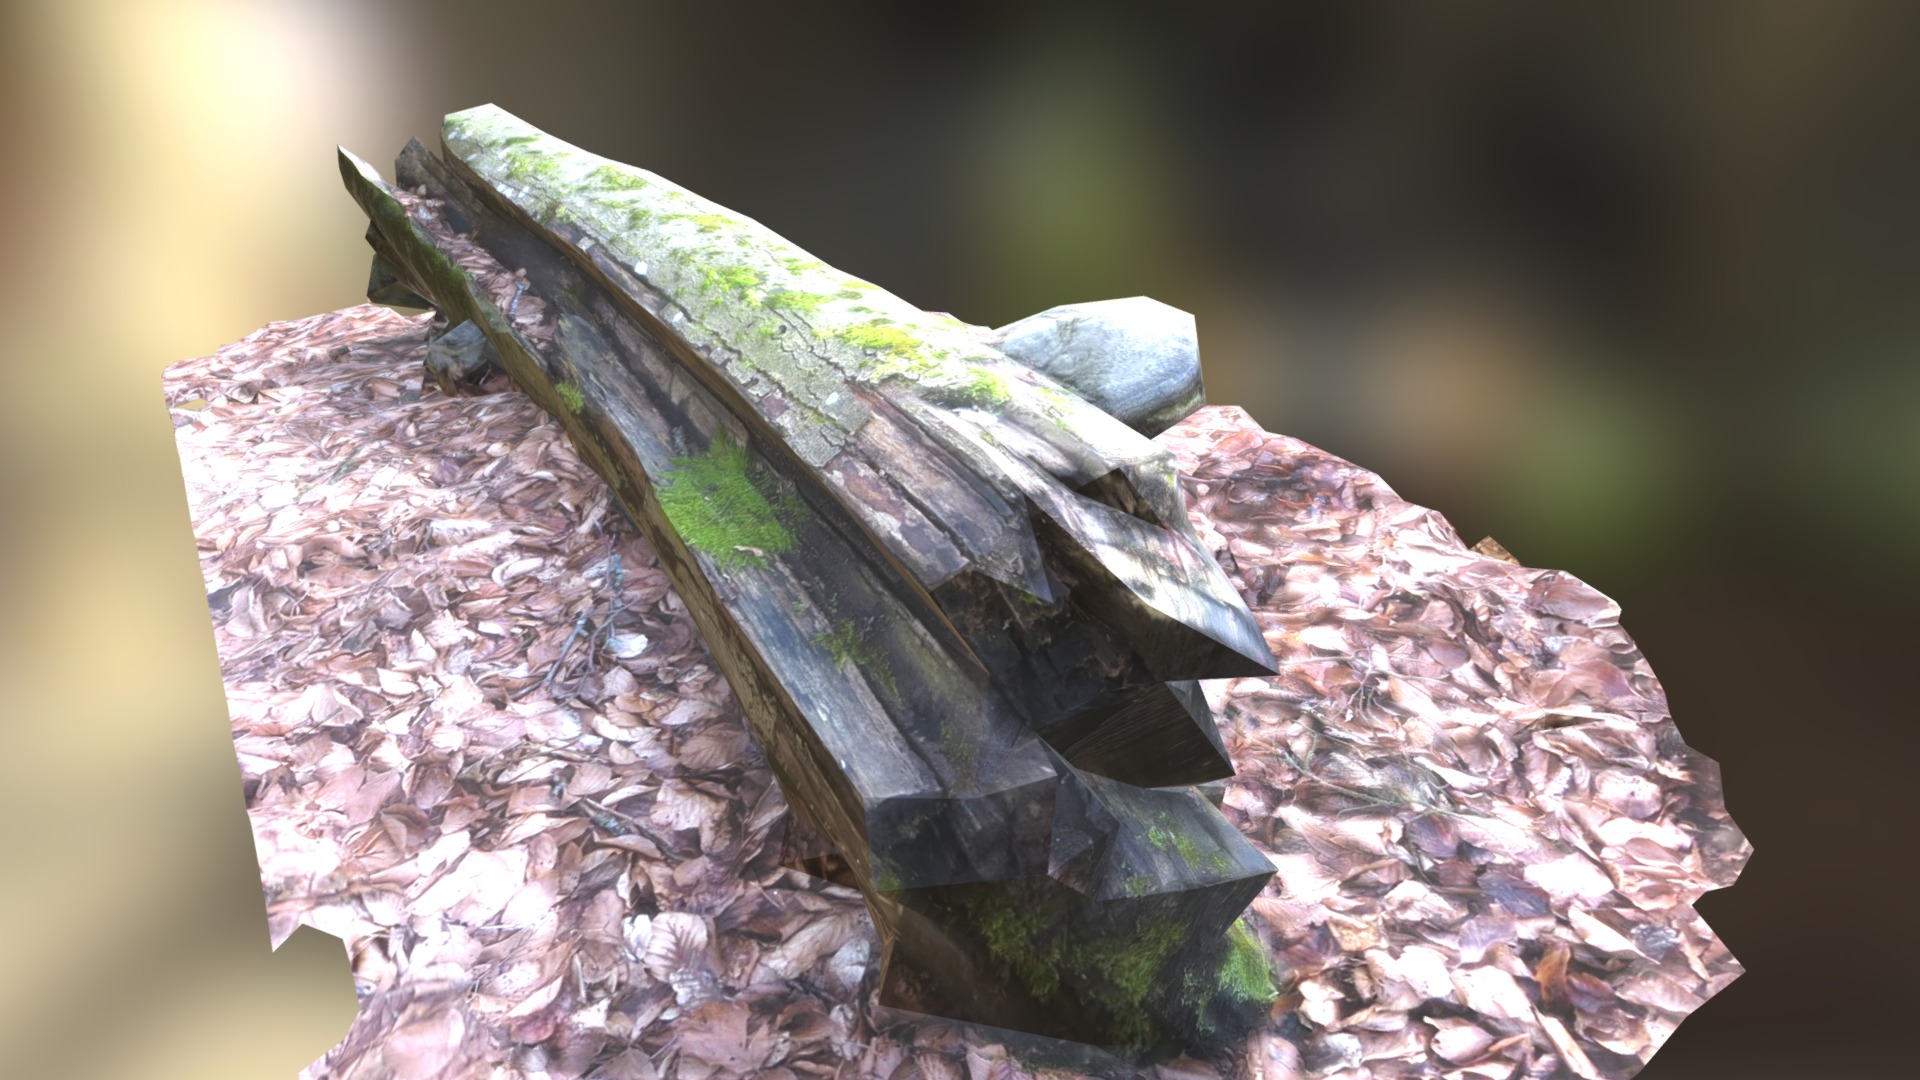 3D model mossy tree trunk - This is a 3D model of the mossy tree trunk. The 3D model is about a lizard on a rock.